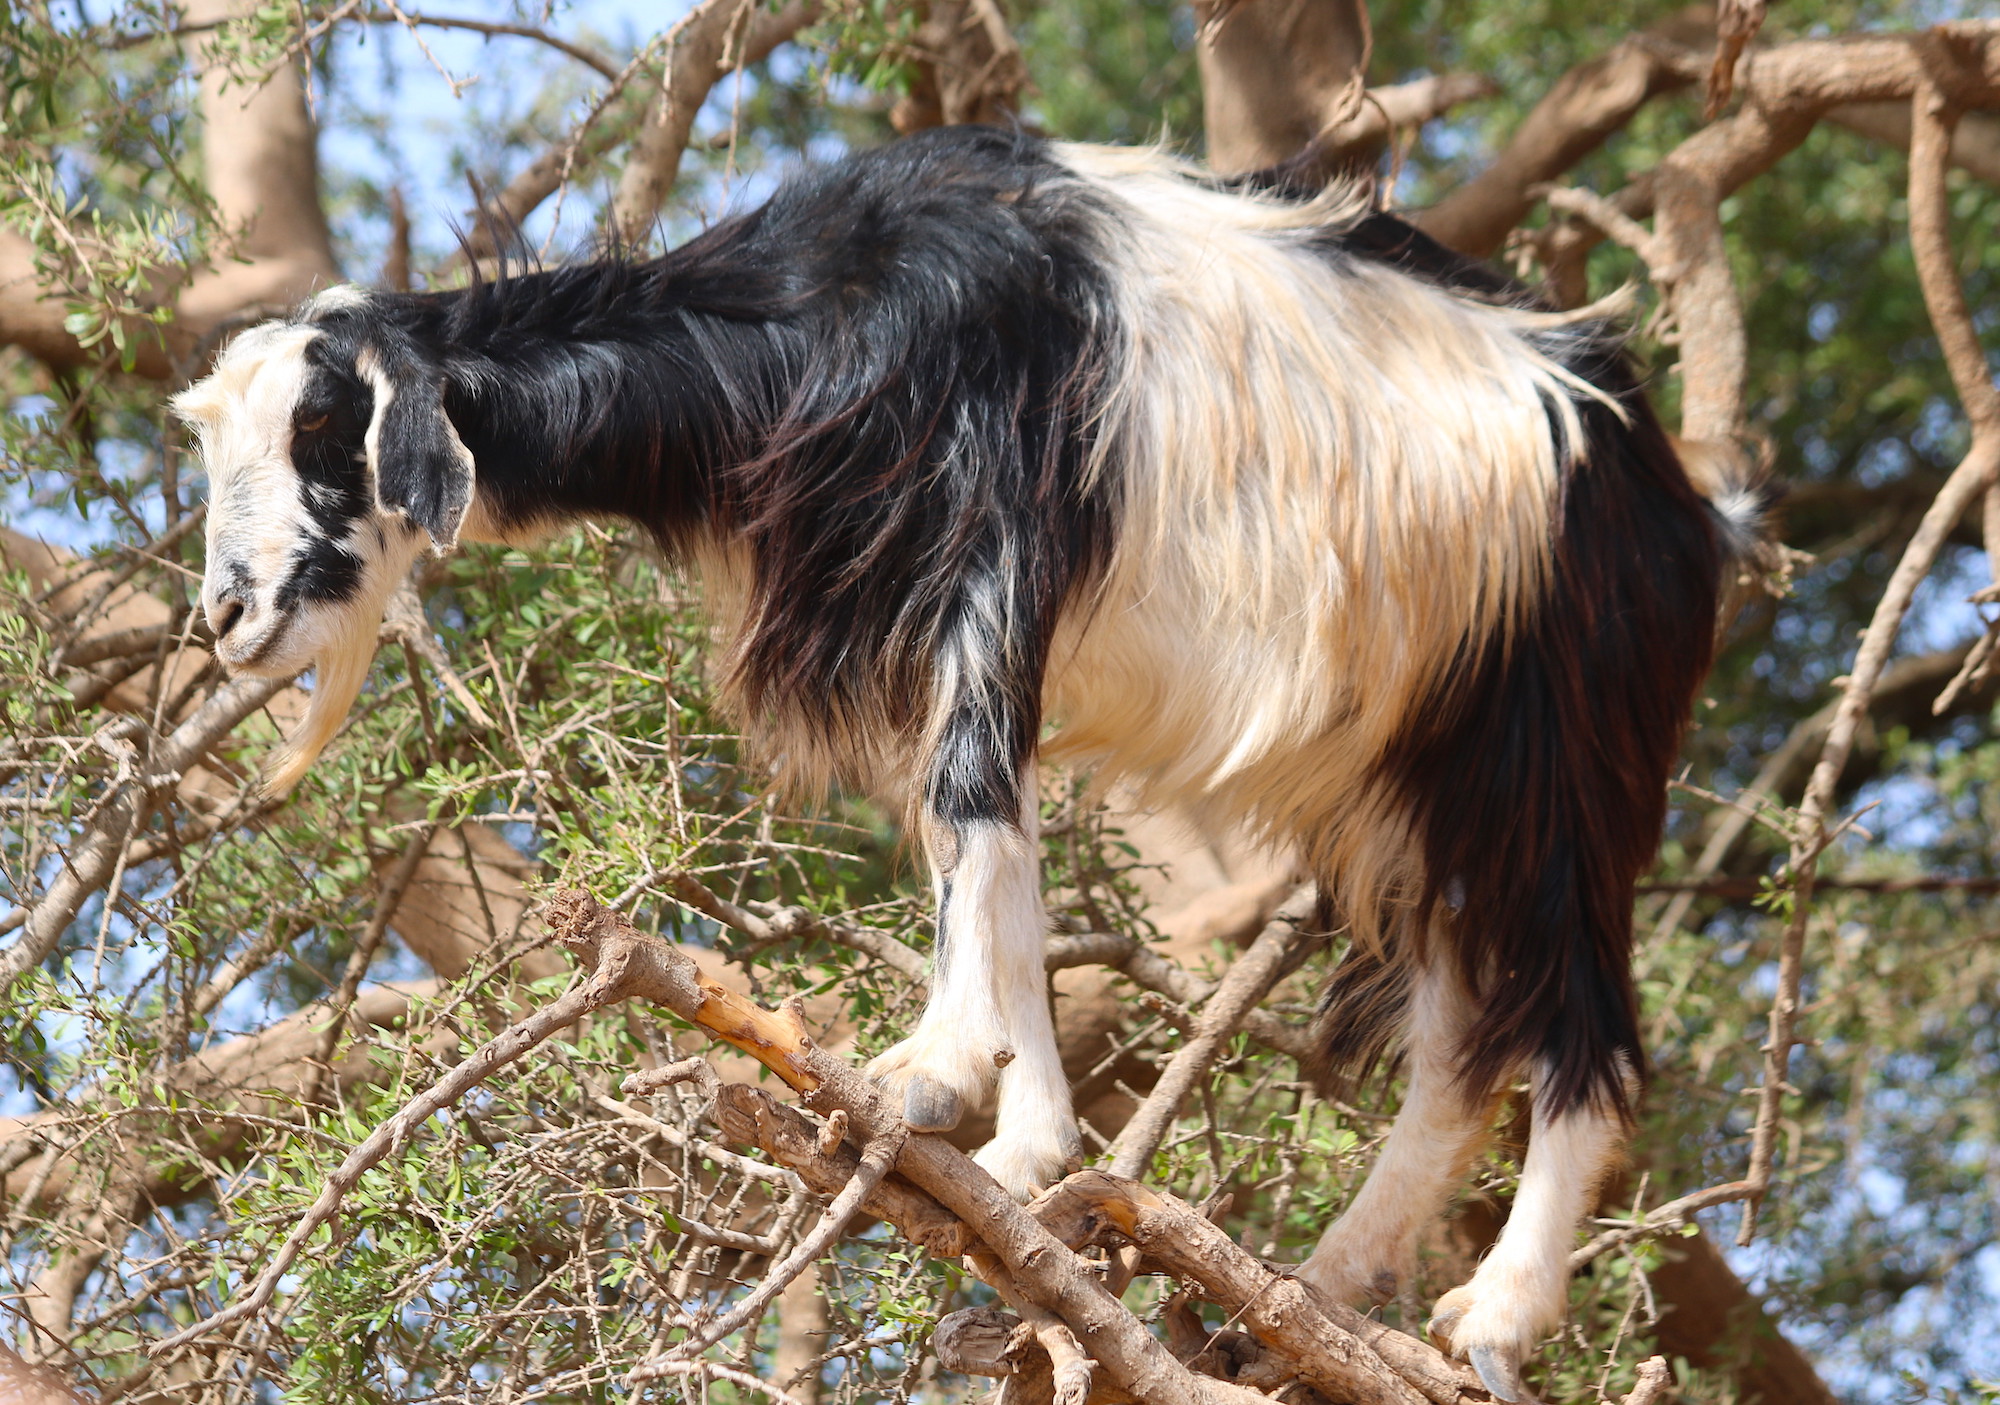 The Moroccan goats